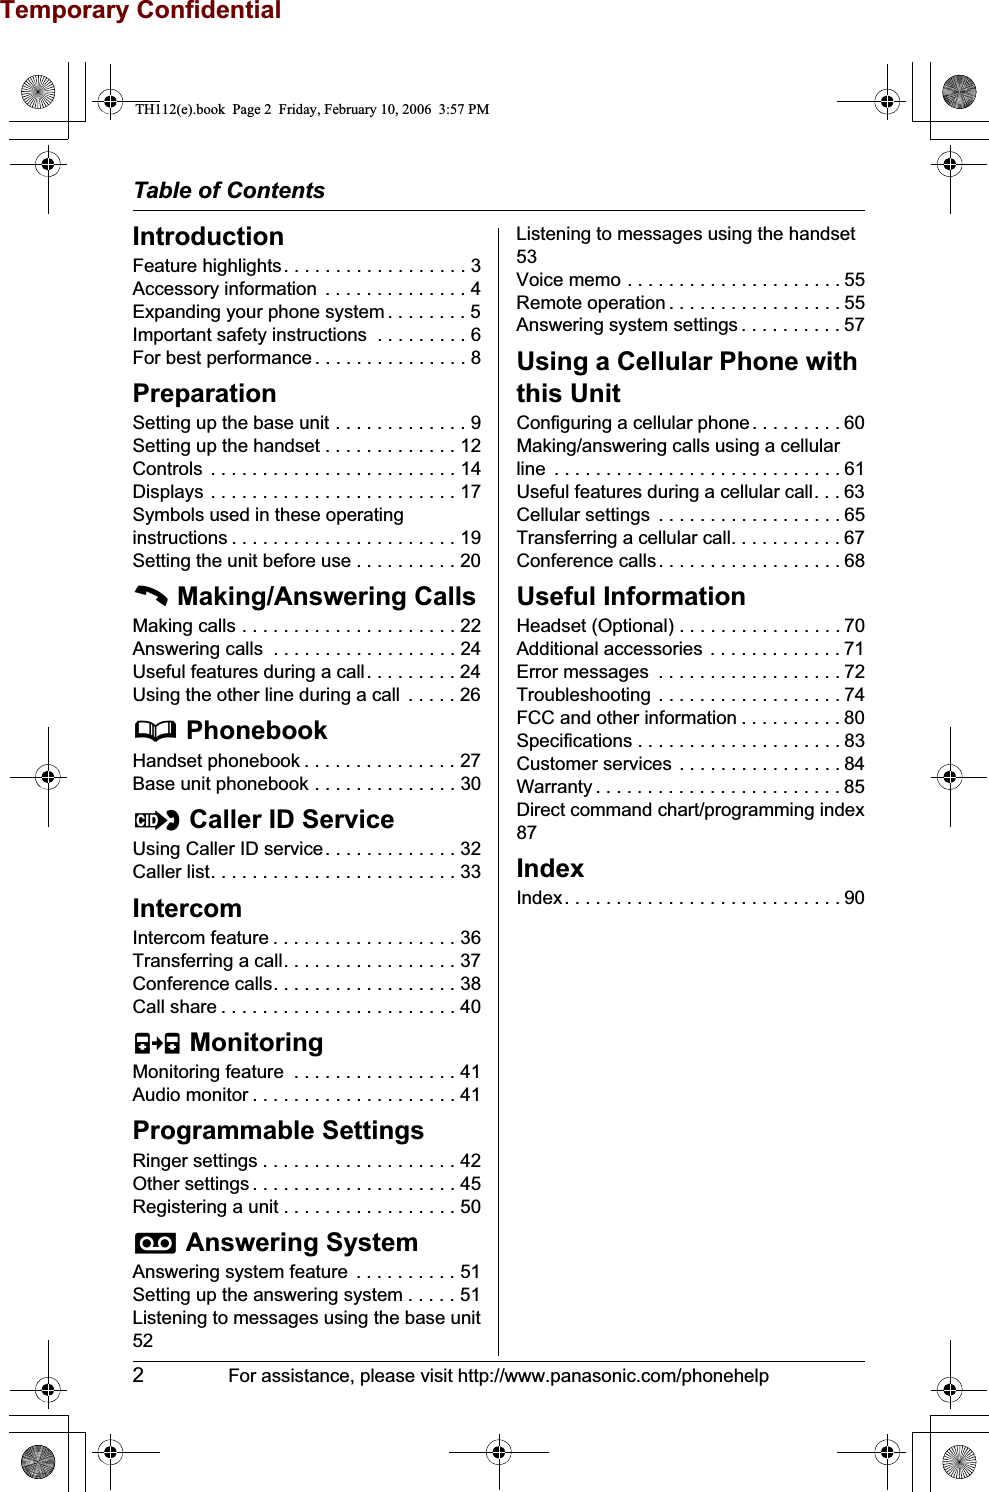 Temporary ConfidentialTable of Contents2For assistance, please visit http://www.panasonic.com/phonehelpIntroductionFeature highlights. . . . . . . . . . . . . . . . . . 3Accessory information  . . . . . . . . . . . . . . 4Expanding your phone system . . . . . . . . 5Important safety instructions  . . . . . . . . . 6For best performance . . . . . . . . . . . . . . . 8PreparationSetting up the base unit . . . . . . . . . . . . . 9Setting up the handset . . . . . . . . . . . . . 12Controls  . . . . . . . . . . . . . . . . . . . . . . . . 14Displays . . . . . . . . . . . . . . . . . . . . . . . . 17Symbols used in these operating instructions . . . . . . . . . . . . . . . . . . . . . . 19Setting the unit before use . . . . . . . . . . 20C Making/Answering CallsMaking calls . . . . . . . . . . . . . . . . . . . . . 22Answering calls  . . . . . . . . . . . . . . . . . . 24Useful features during a call. . . . . . . . . 24Using the other line during a call  . . . . . 26d PhonebookHandset phonebook . . . . . . . . . . . . . . . 27Base unit phonebook . . . . . . . . . . . . . . 30G Caller ID ServiceUsing Caller ID service. . . . . . . . . . . . . 32Caller list. . . . . . . . . . . . . . . . . . . . . . . . 33IntercomIntercom feature . . . . . . . . . . . . . . . . . . 36Transferring a call. . . . . . . . . . . . . . . . . 37Conference calls. . . . . . . . . . . . . . . . . . 38Call share . . . . . . . . . . . . . . . . . . . . . . . 40F MonitoringMonitoring feature  . . . . . . . . . . . . . . . . 41Audio monitor . . . . . . . . . . . . . . . . . . . . 41Programmable SettingsRinger settings . . . . . . . . . . . . . . . . . . . 42Other settings . . . . . . . . . . . . . . . . . . . . 45Registering a unit . . . . . . . . . . . . . . . . . 50i Answering SystemAnswering system feature  . . . . . . . . . . 51Setting up the answering system . . . . . 51Listening to messages using the base unit52Listening to messages using the handset53Voice memo . . . . . . . . . . . . . . . . . . . . . 55Remote operation . . . . . . . . . . . . . . . . . 55Answering system settings . . . . . . . . . . 57Using a Cellular Phone with this UnitConfiguring a cellular phone. . . . . . . . . 60Making/answering calls using a cellular line  . . . . . . . . . . . . . . . . . . . . . . . . . . . . 61Useful features during a cellular call. . . 63Cellular settings  . . . . . . . . . . . . . . . . . . 65Transferring a cellular call. . . . . . . . . . . 67Conference calls. . . . . . . . . . . . . . . . . . 68Useful InformationHeadset (Optional) . . . . . . . . . . . . . . . . 70Additional accessories . . . . . . . . . . . . . 71Error messages  . . . . . . . . . . . . . . . . . . 72Troubleshooting . . . . . . . . . . . . . . . . . . 74FCC and other information . . . . . . . . . . 80Specifications . . . . . . . . . . . . . . . . . . . . 83Customer services . . . . . . . . . . . . . . . . 84Warranty . . . . . . . . . . . . . . . . . . . . . . . . 85Direct command chart/programming index87IndexIndex. . . . . . . . . . . . . . . . . . . . . . . . . . . 90TH112(e).book  Page 2  Friday, February 10, 2006  3:57 PM